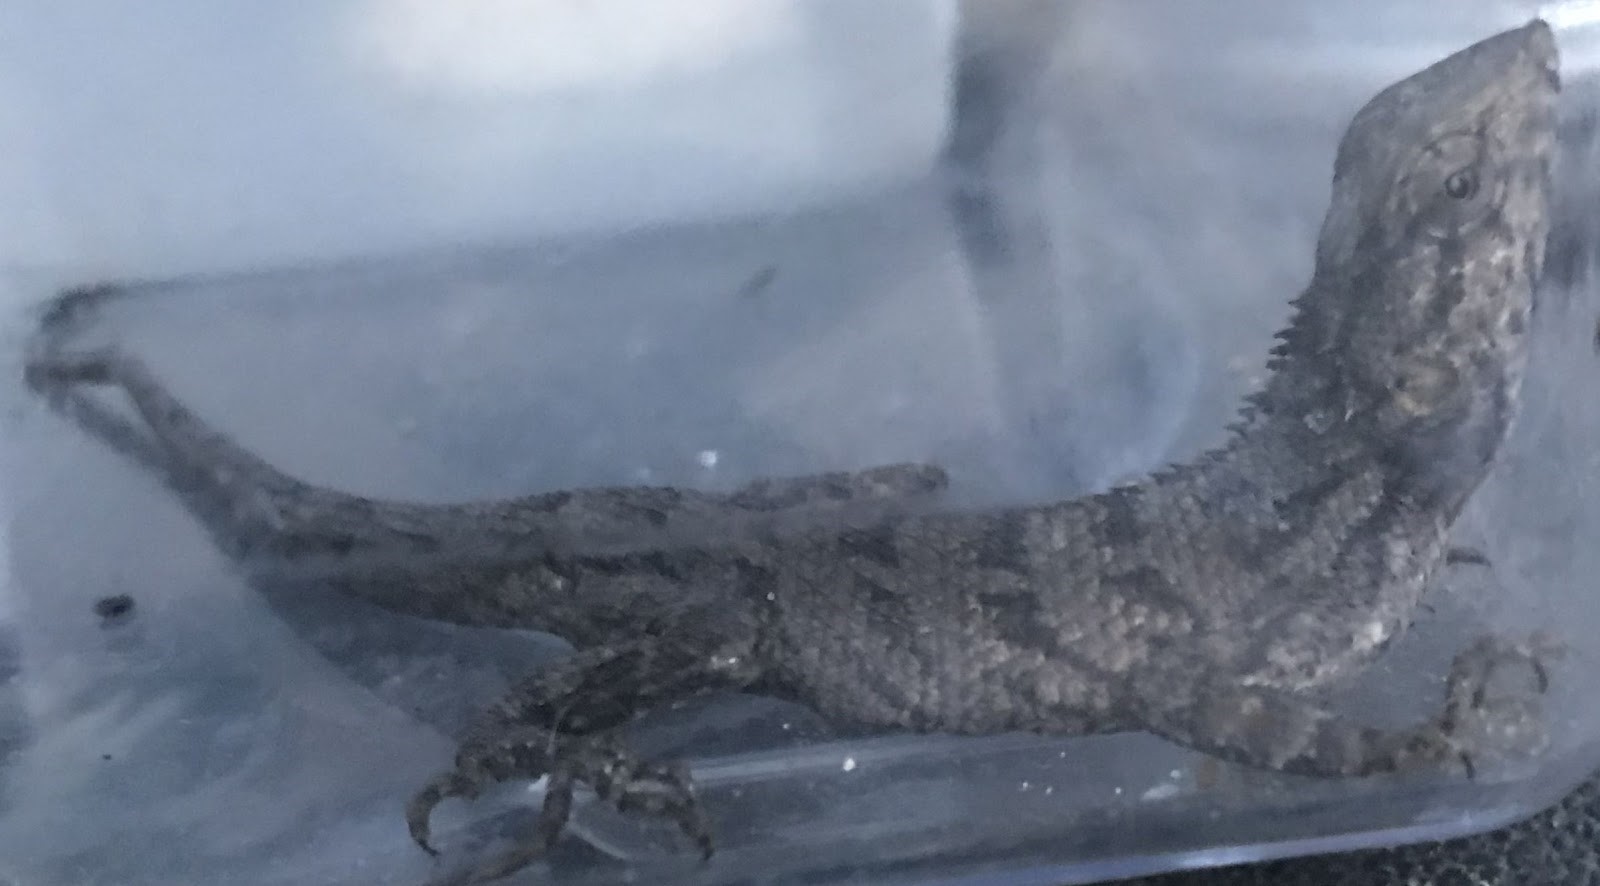 Lizard found at the Port of Felixstowe in 2018